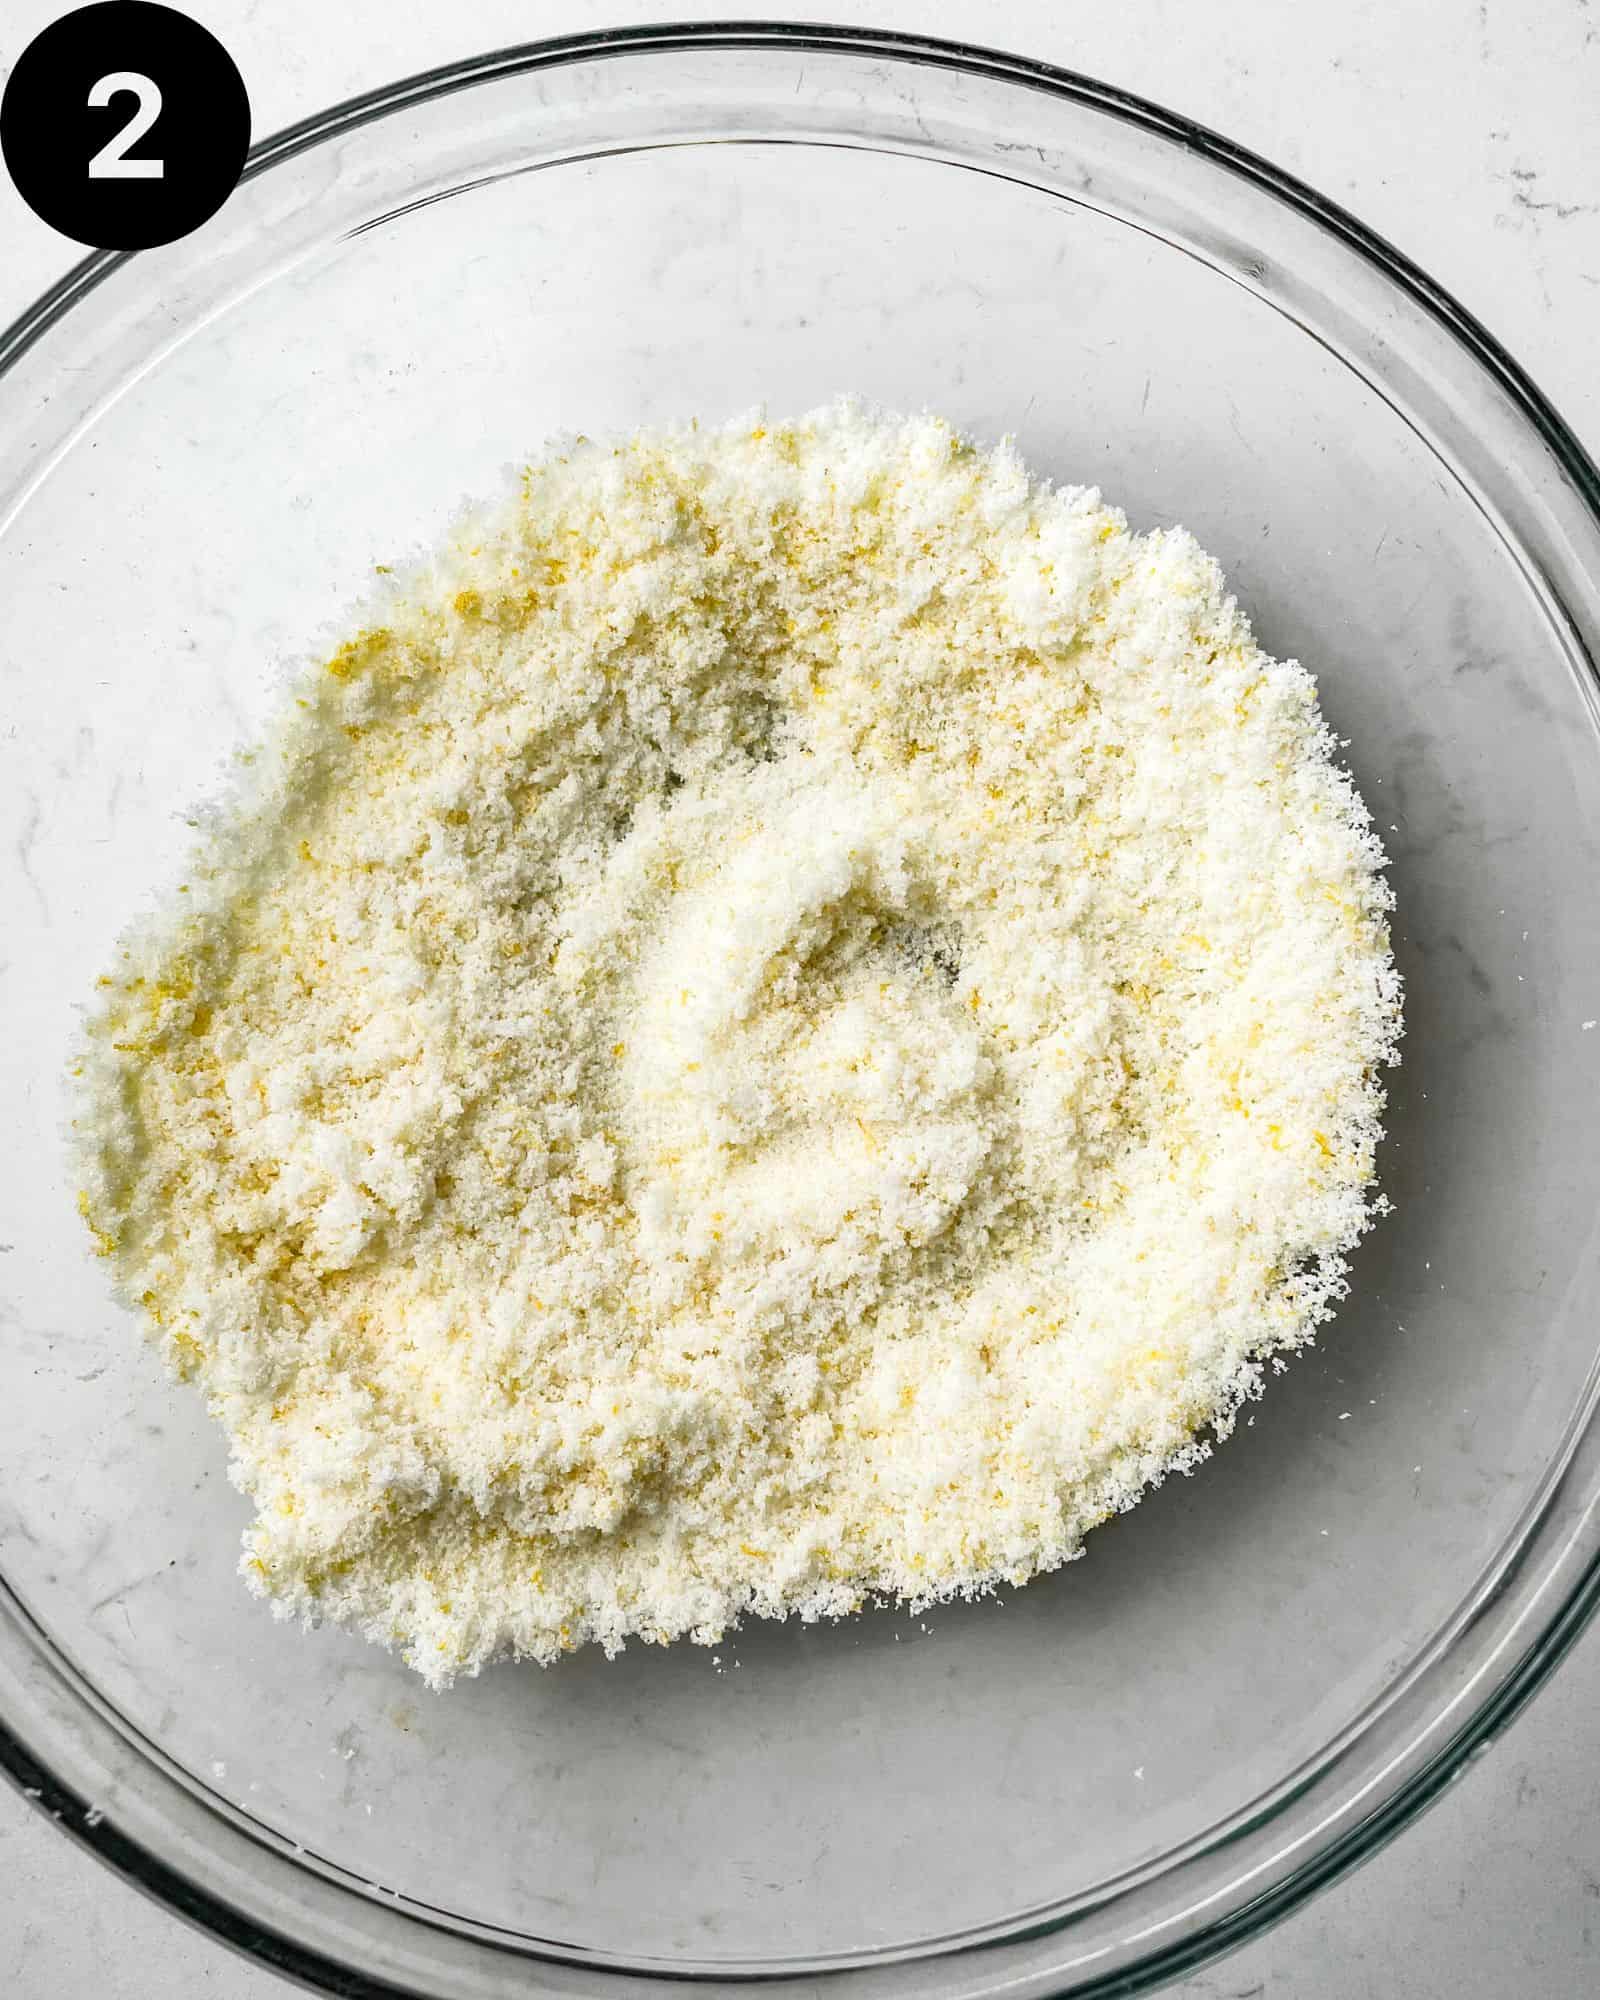 lemon zest and sugar in a small bowl.